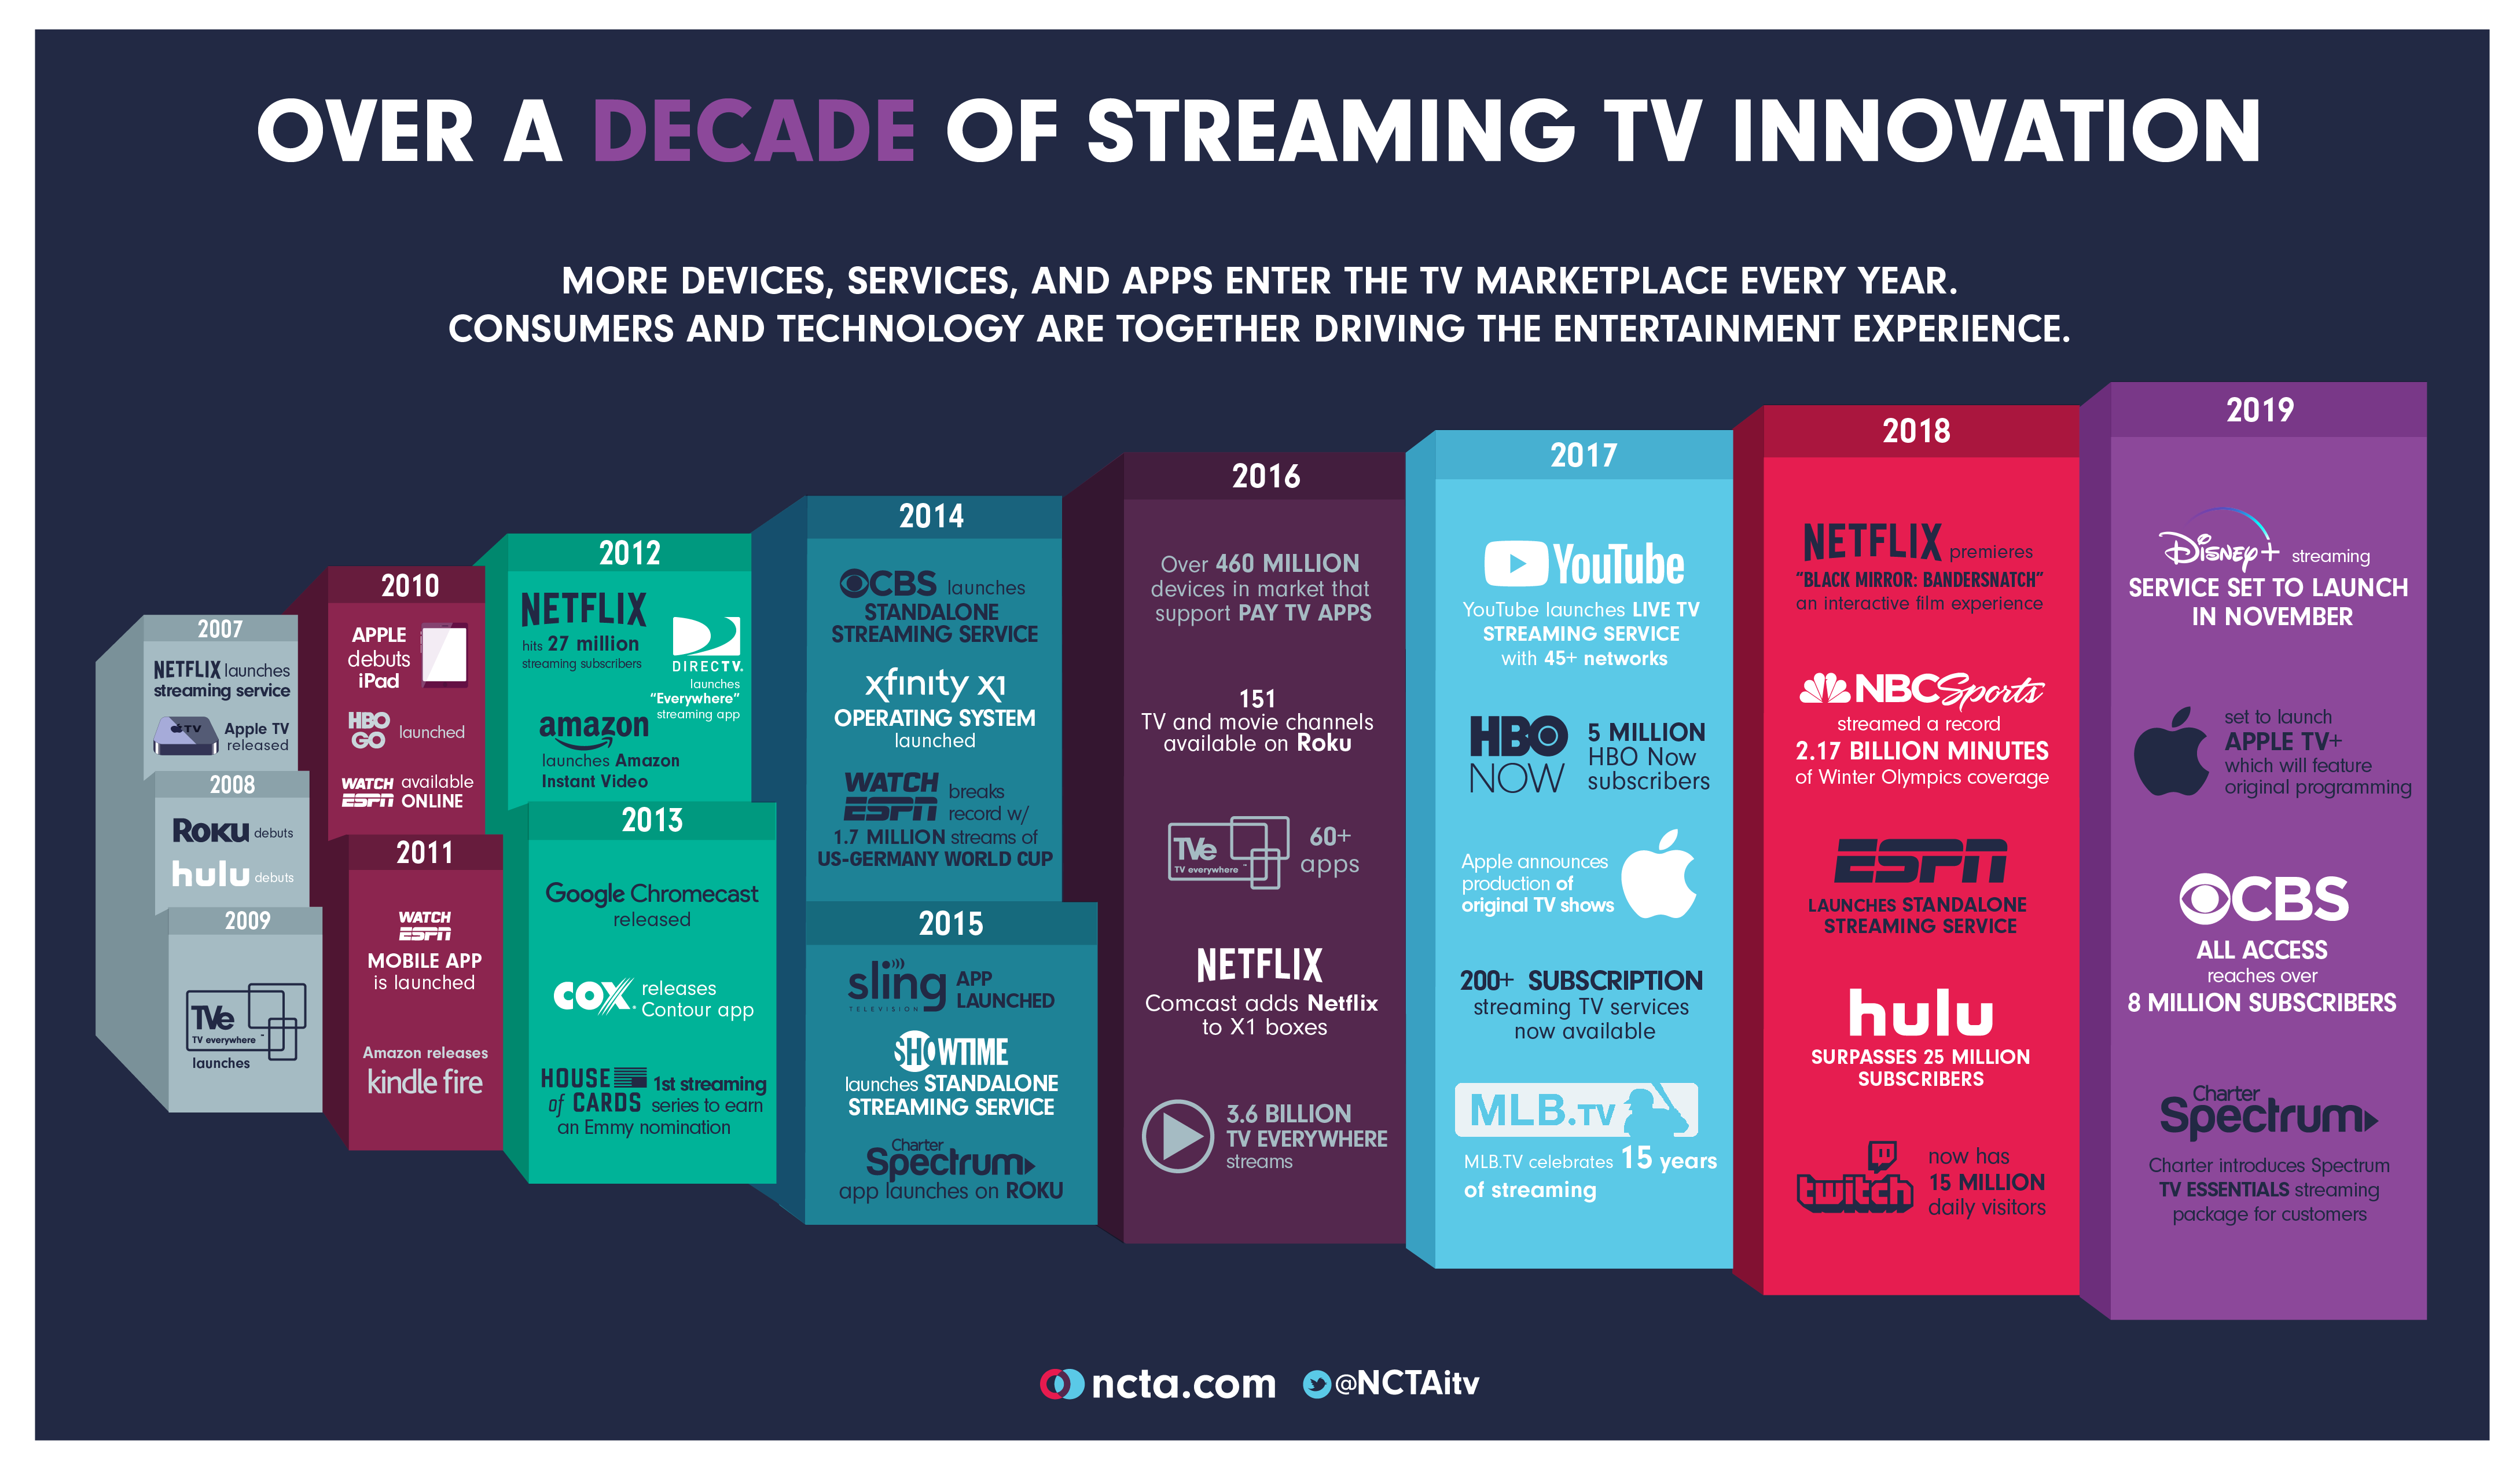 Over a Decade of Streaming TV Innovation